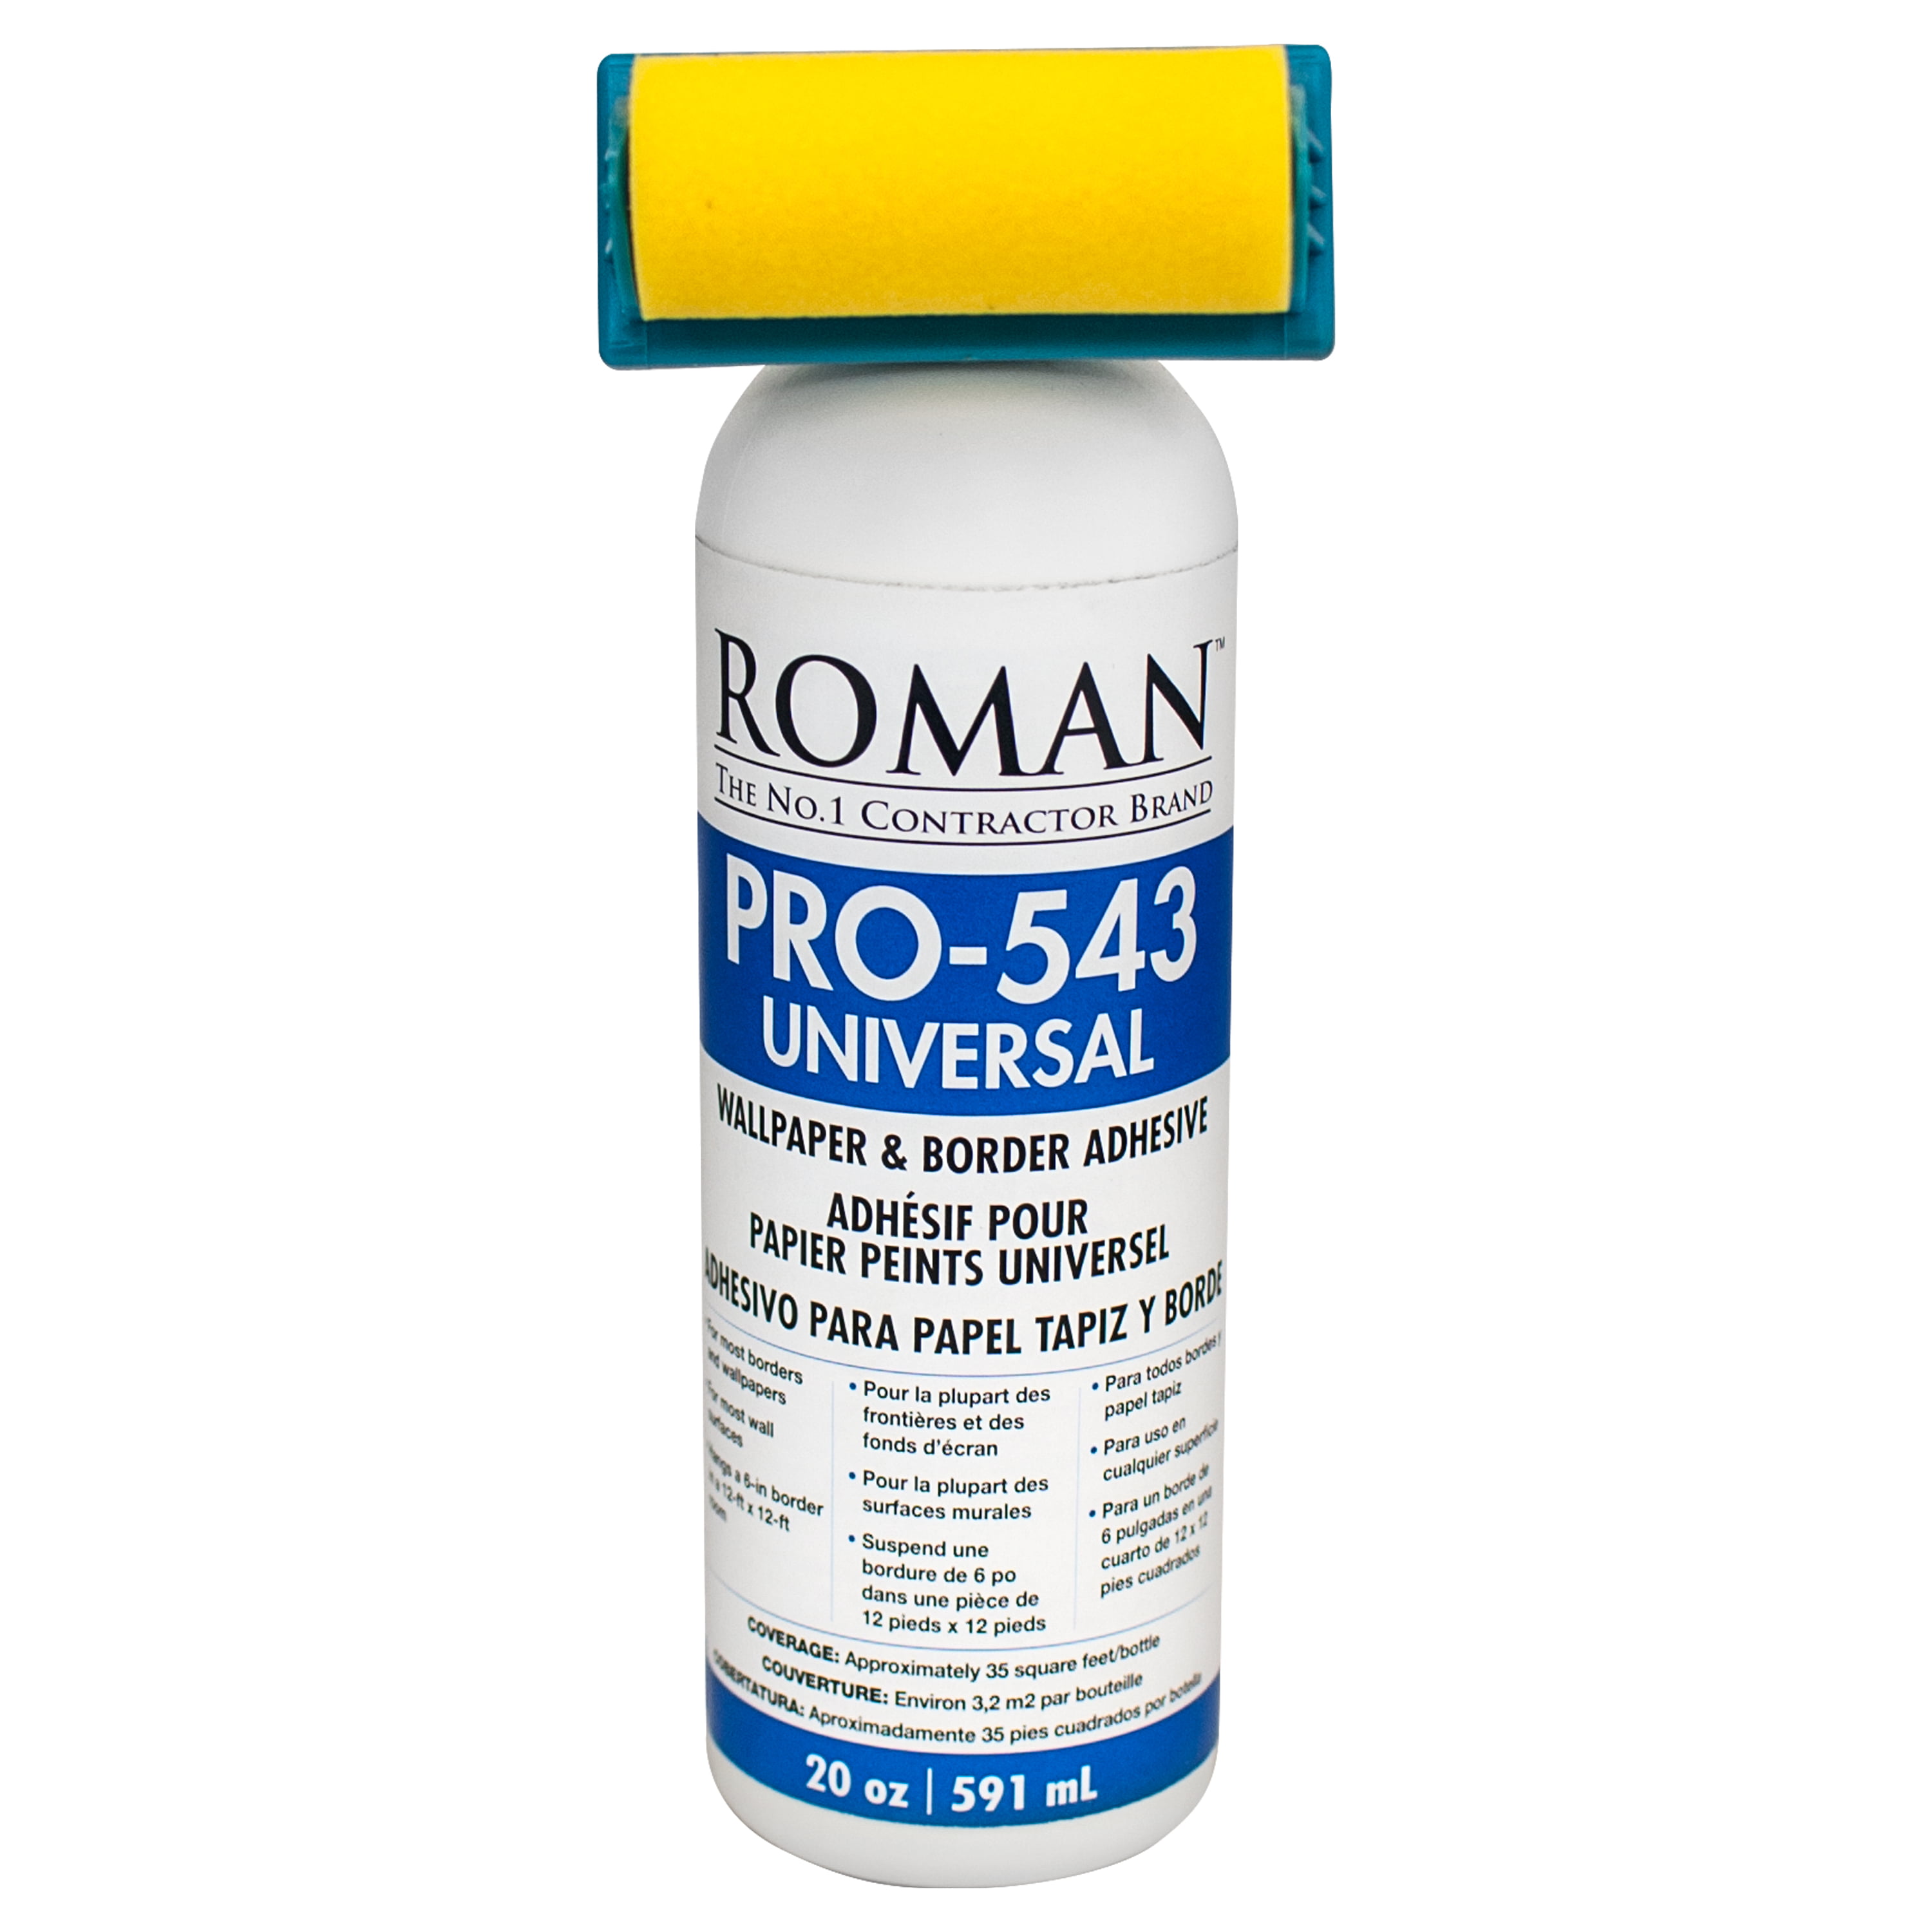 PRO-543 Universal Wallpaper and Border Adhesive Features - ROMAN Products 